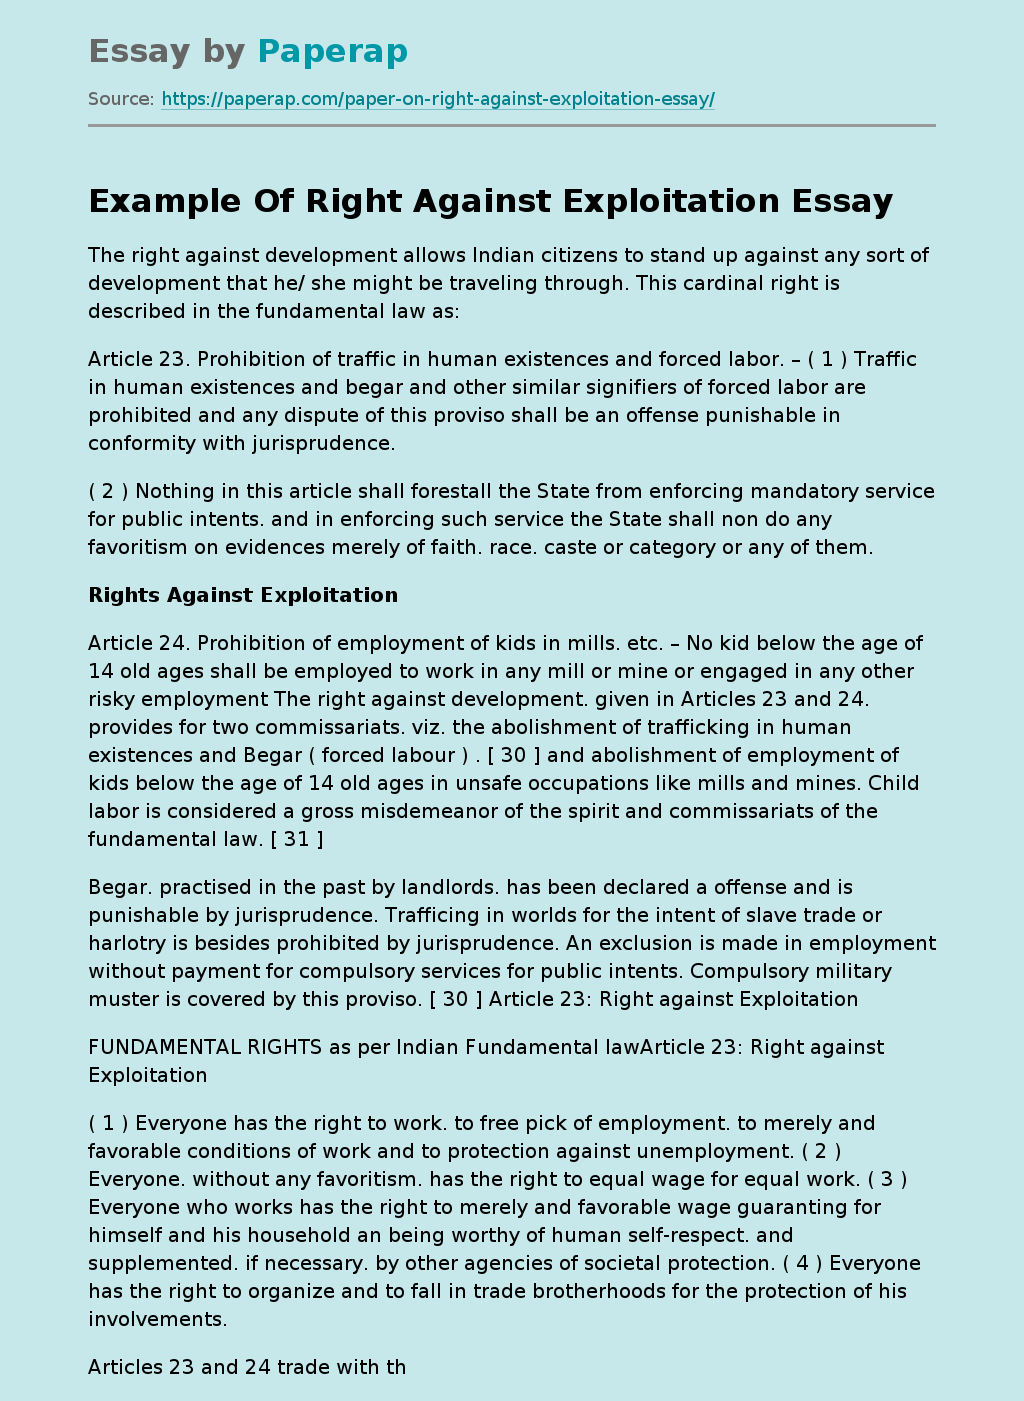 Example Of Right Against Exploitation